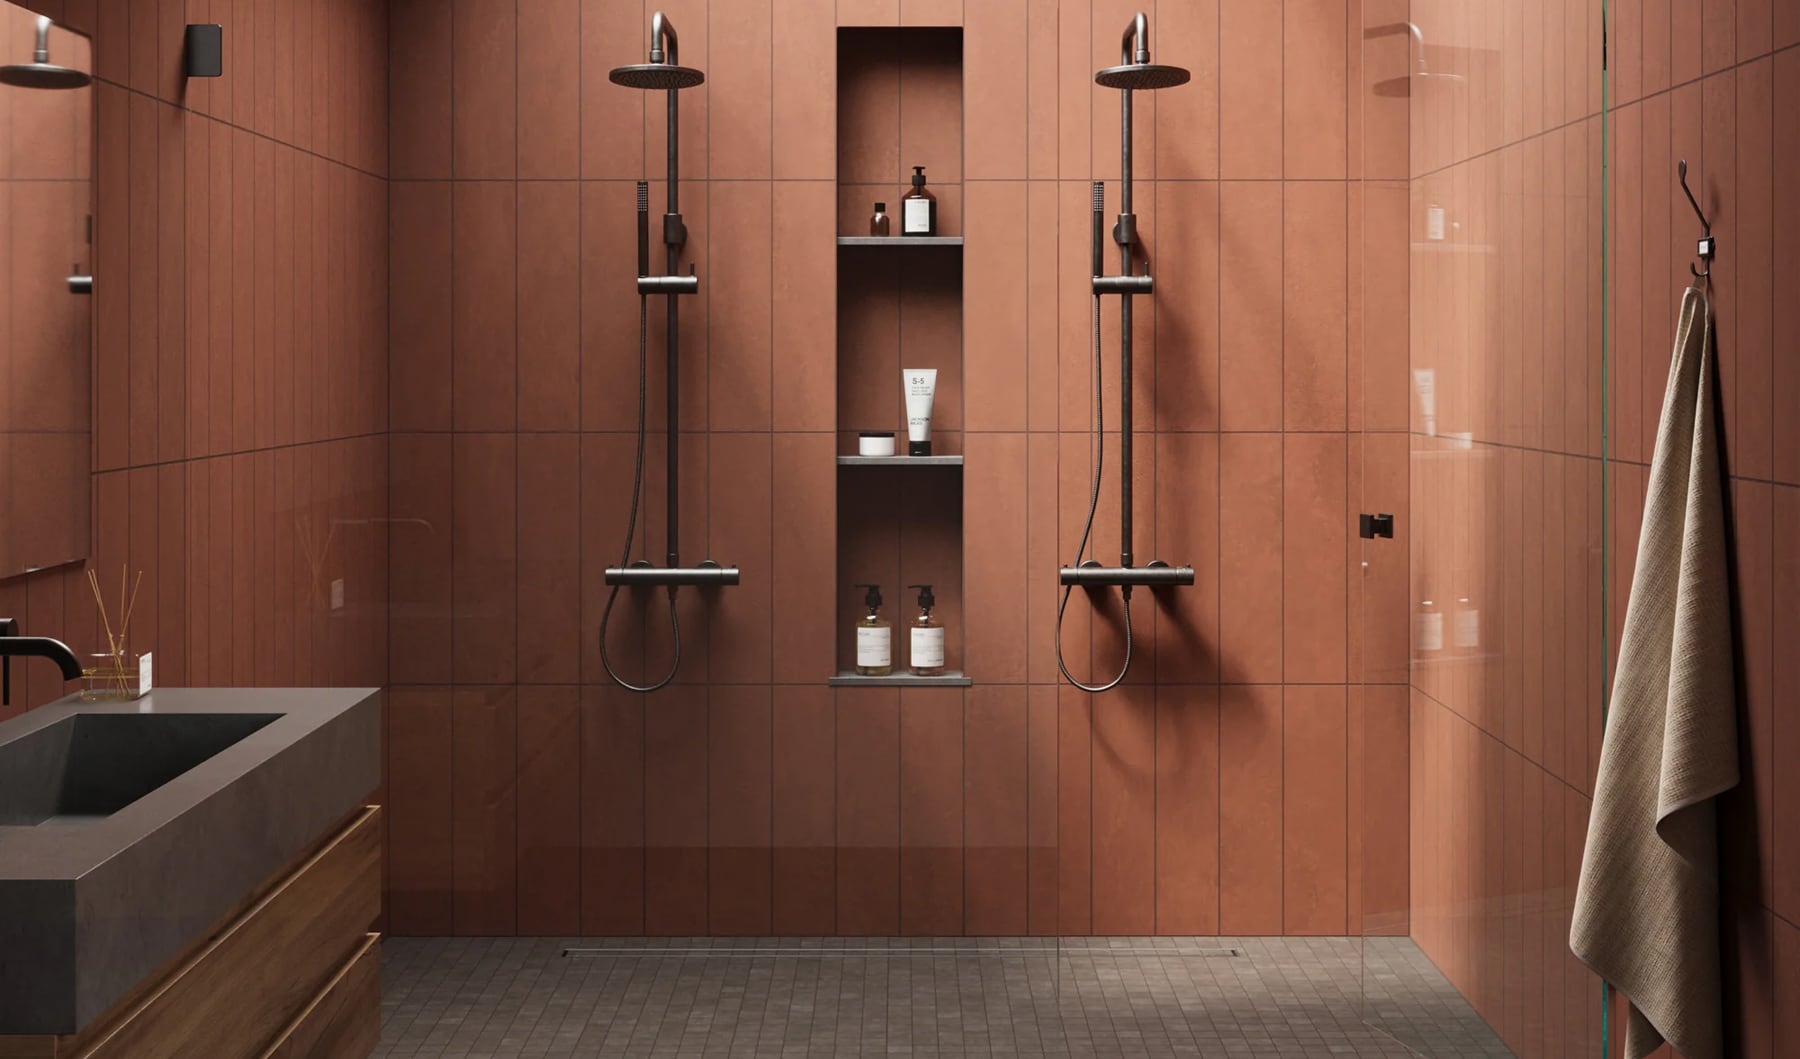 Inviting bathroom shower clad in rich red tile, offering a bold and luxurious bathing experience